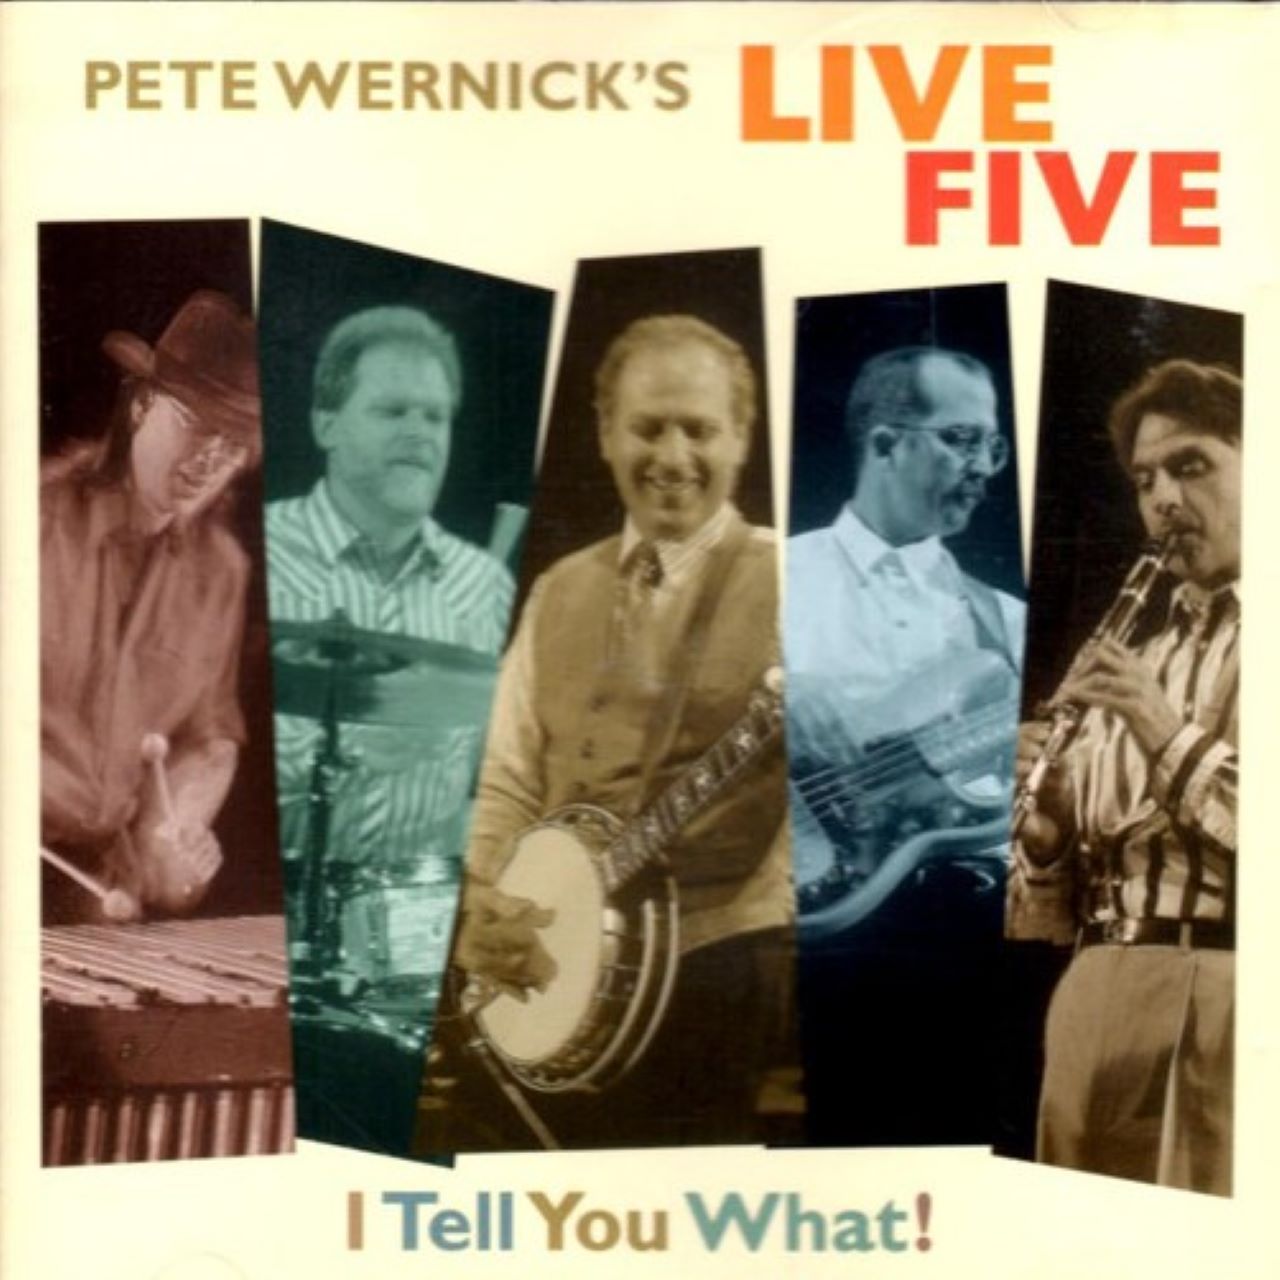 Pete Wernick's Live Five - I Tell You What cover album